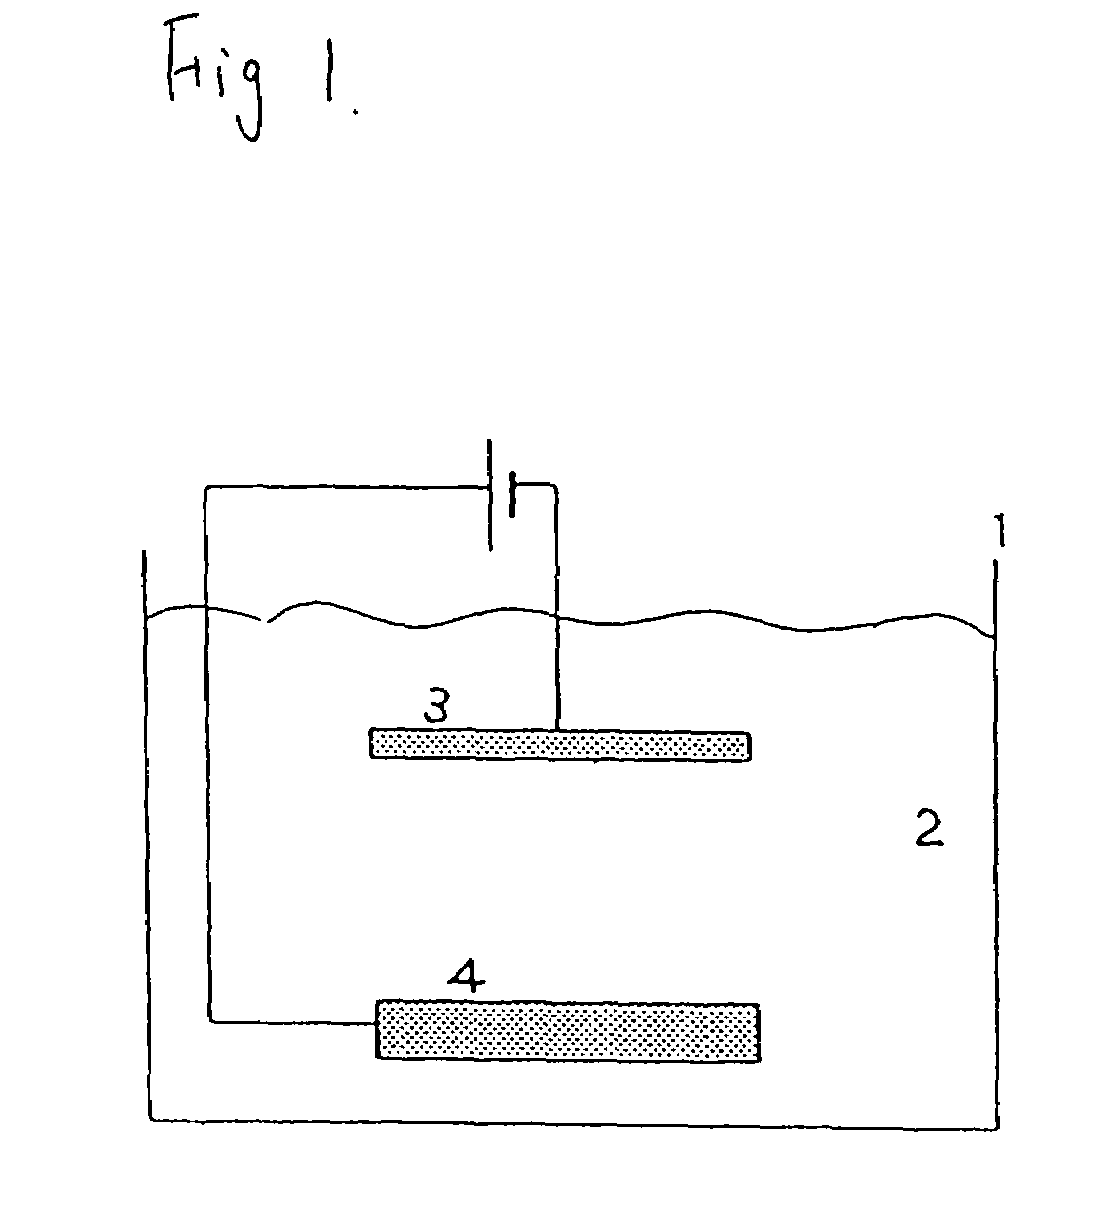 Copper electroplating method, pure copper anode for copper electroplating, and semiconductor wafer plated thereby with little particle adhesion